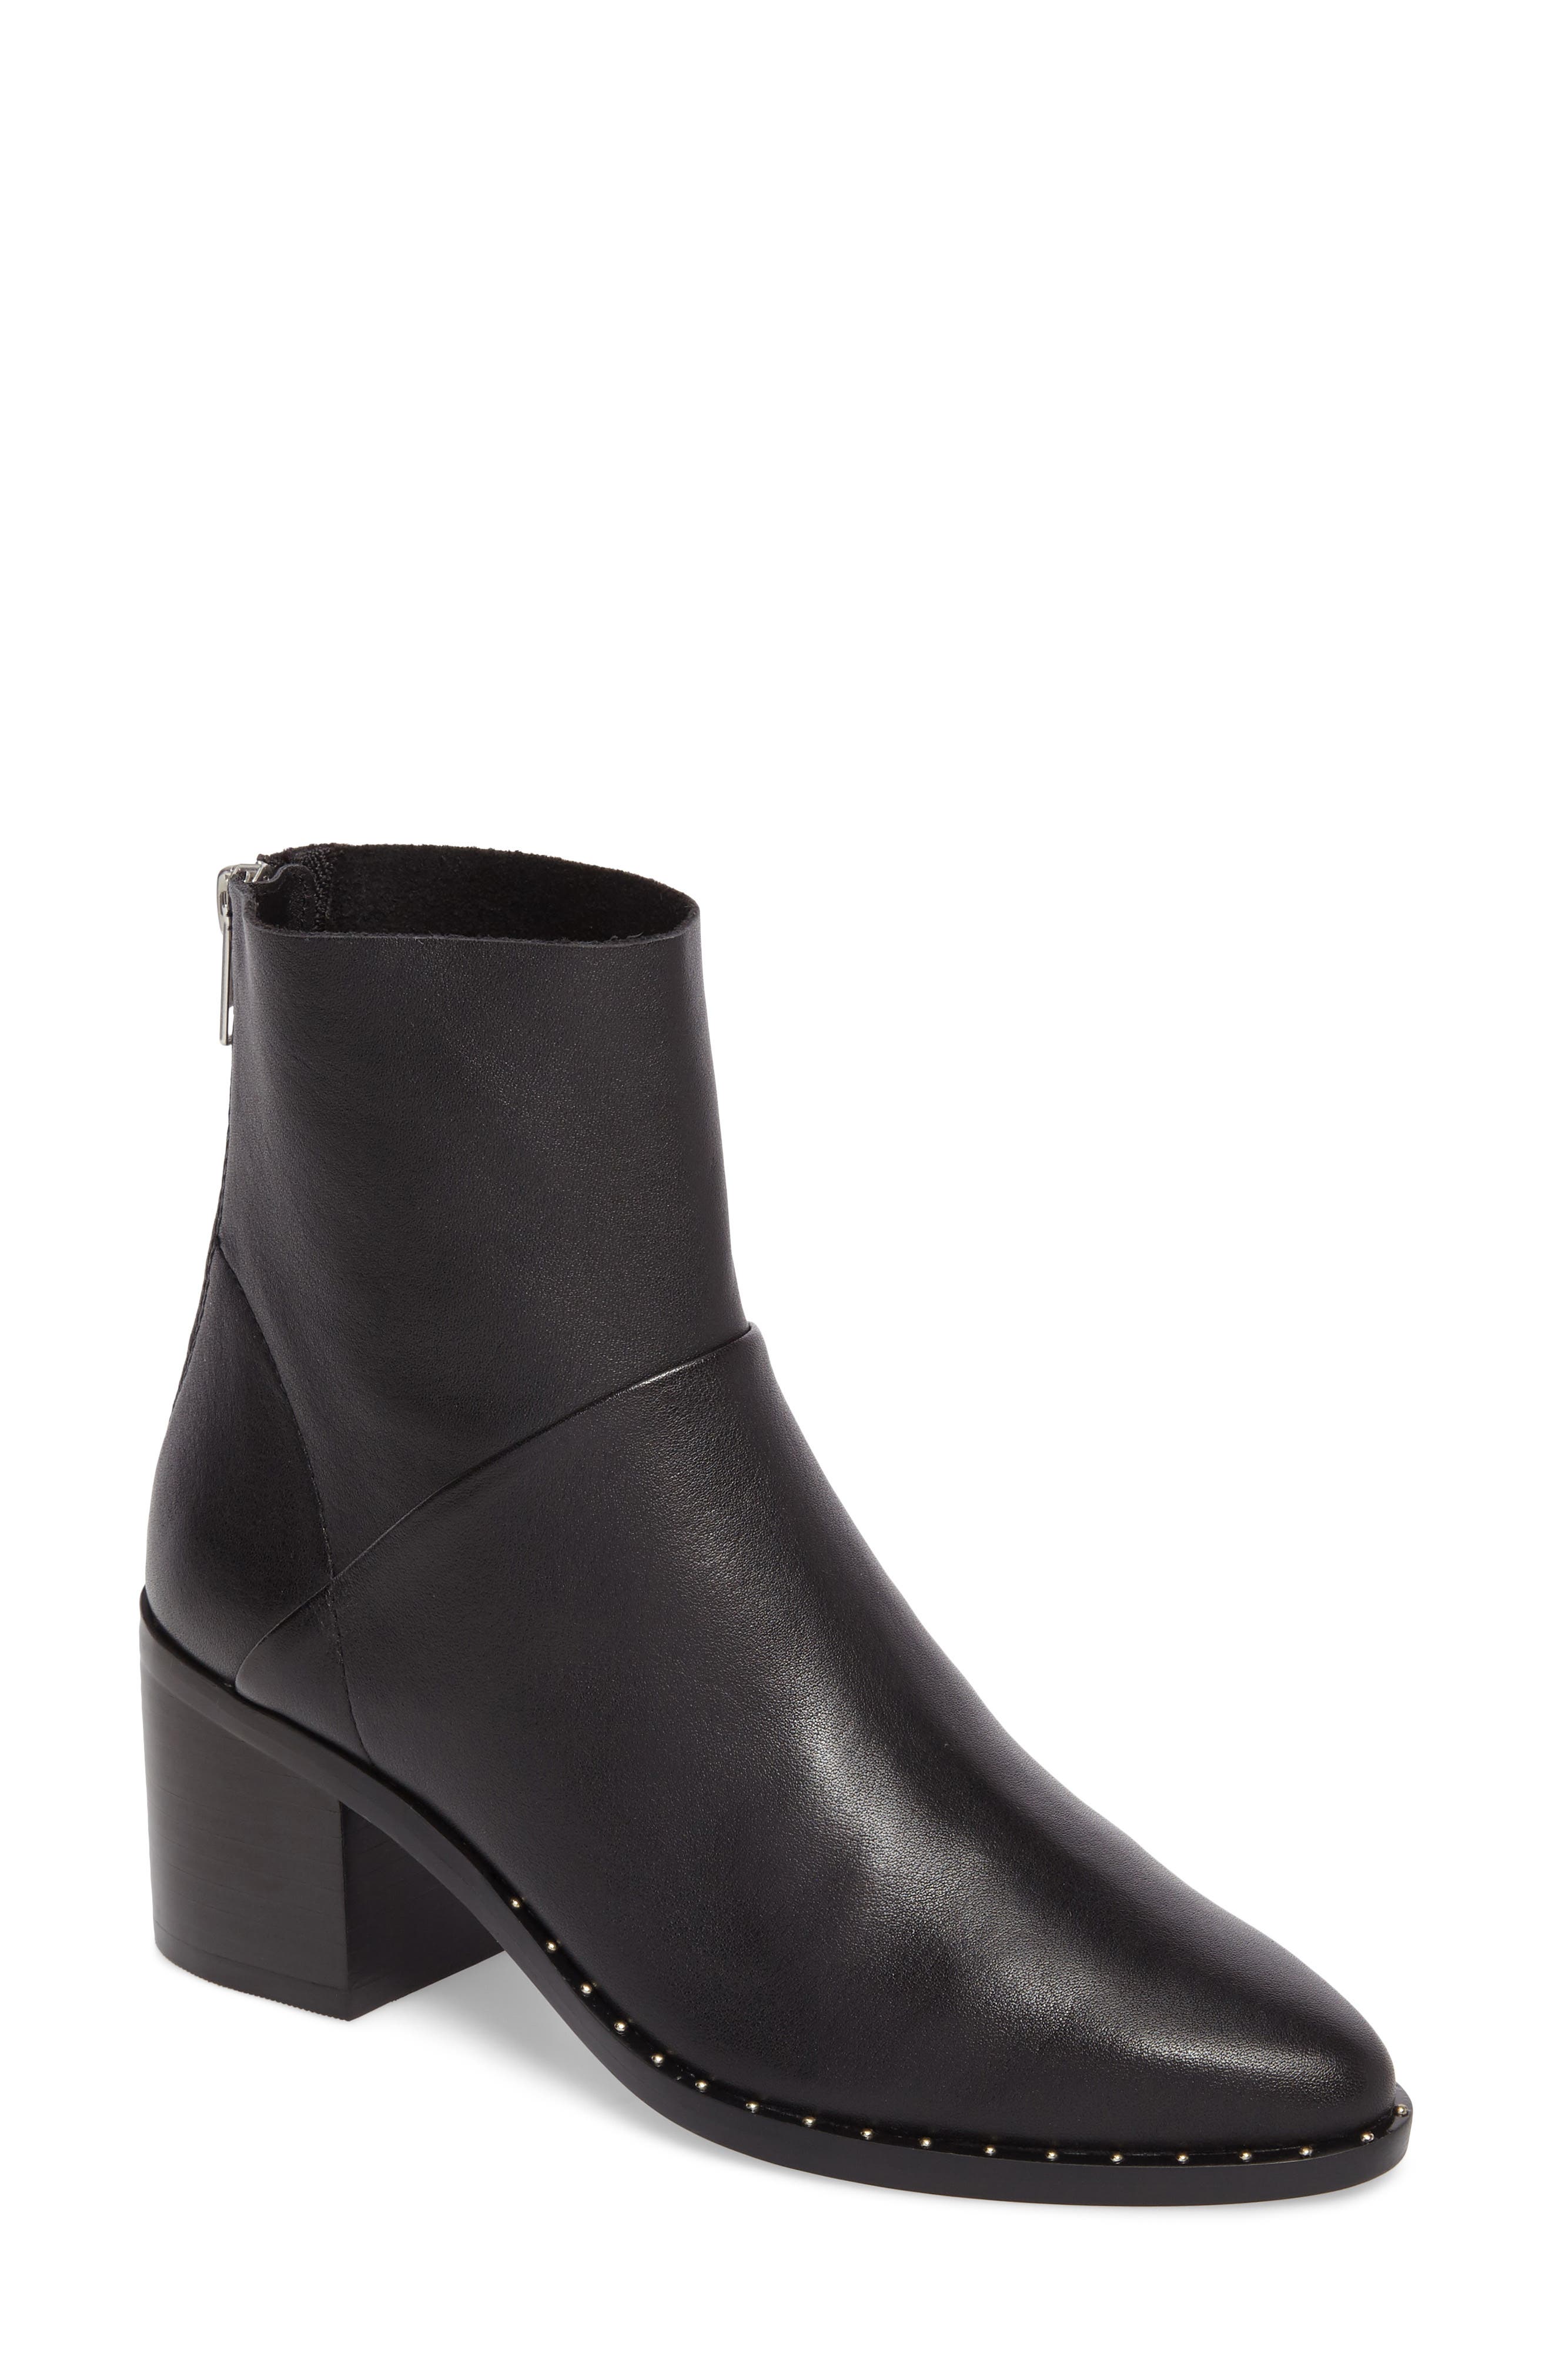 nordstrom womens ankle boots